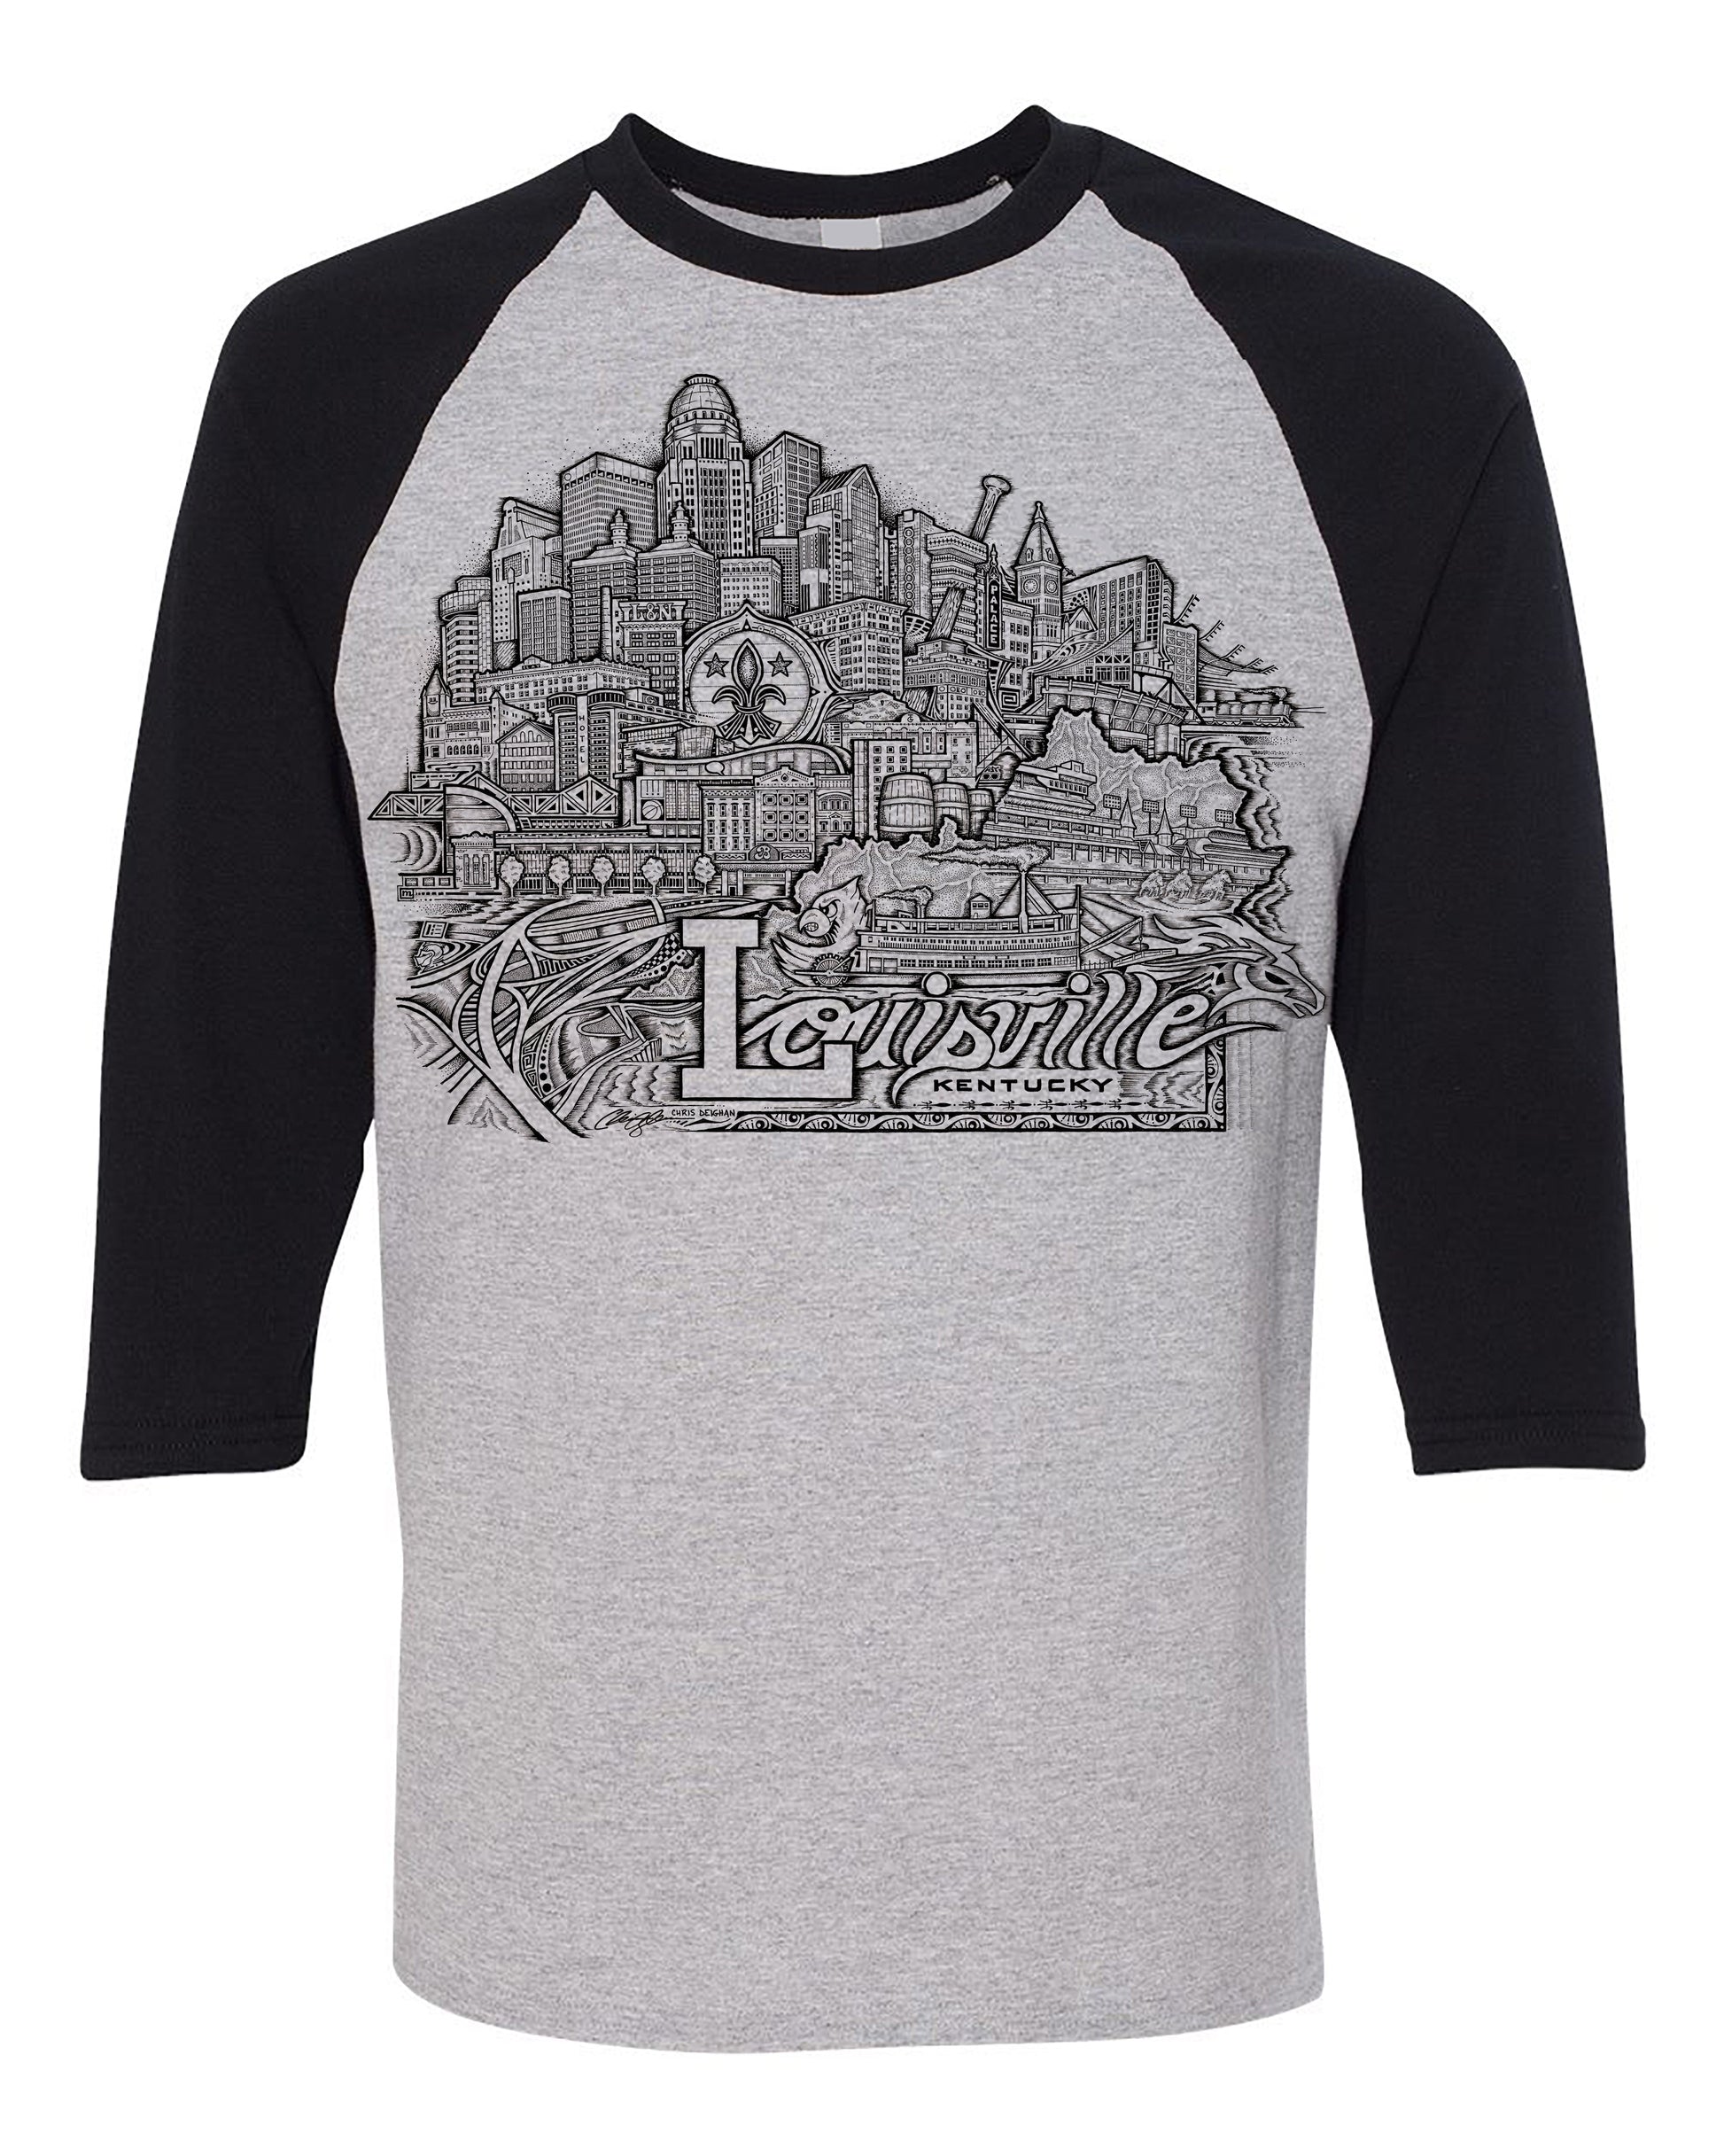 black and white louisville shirt